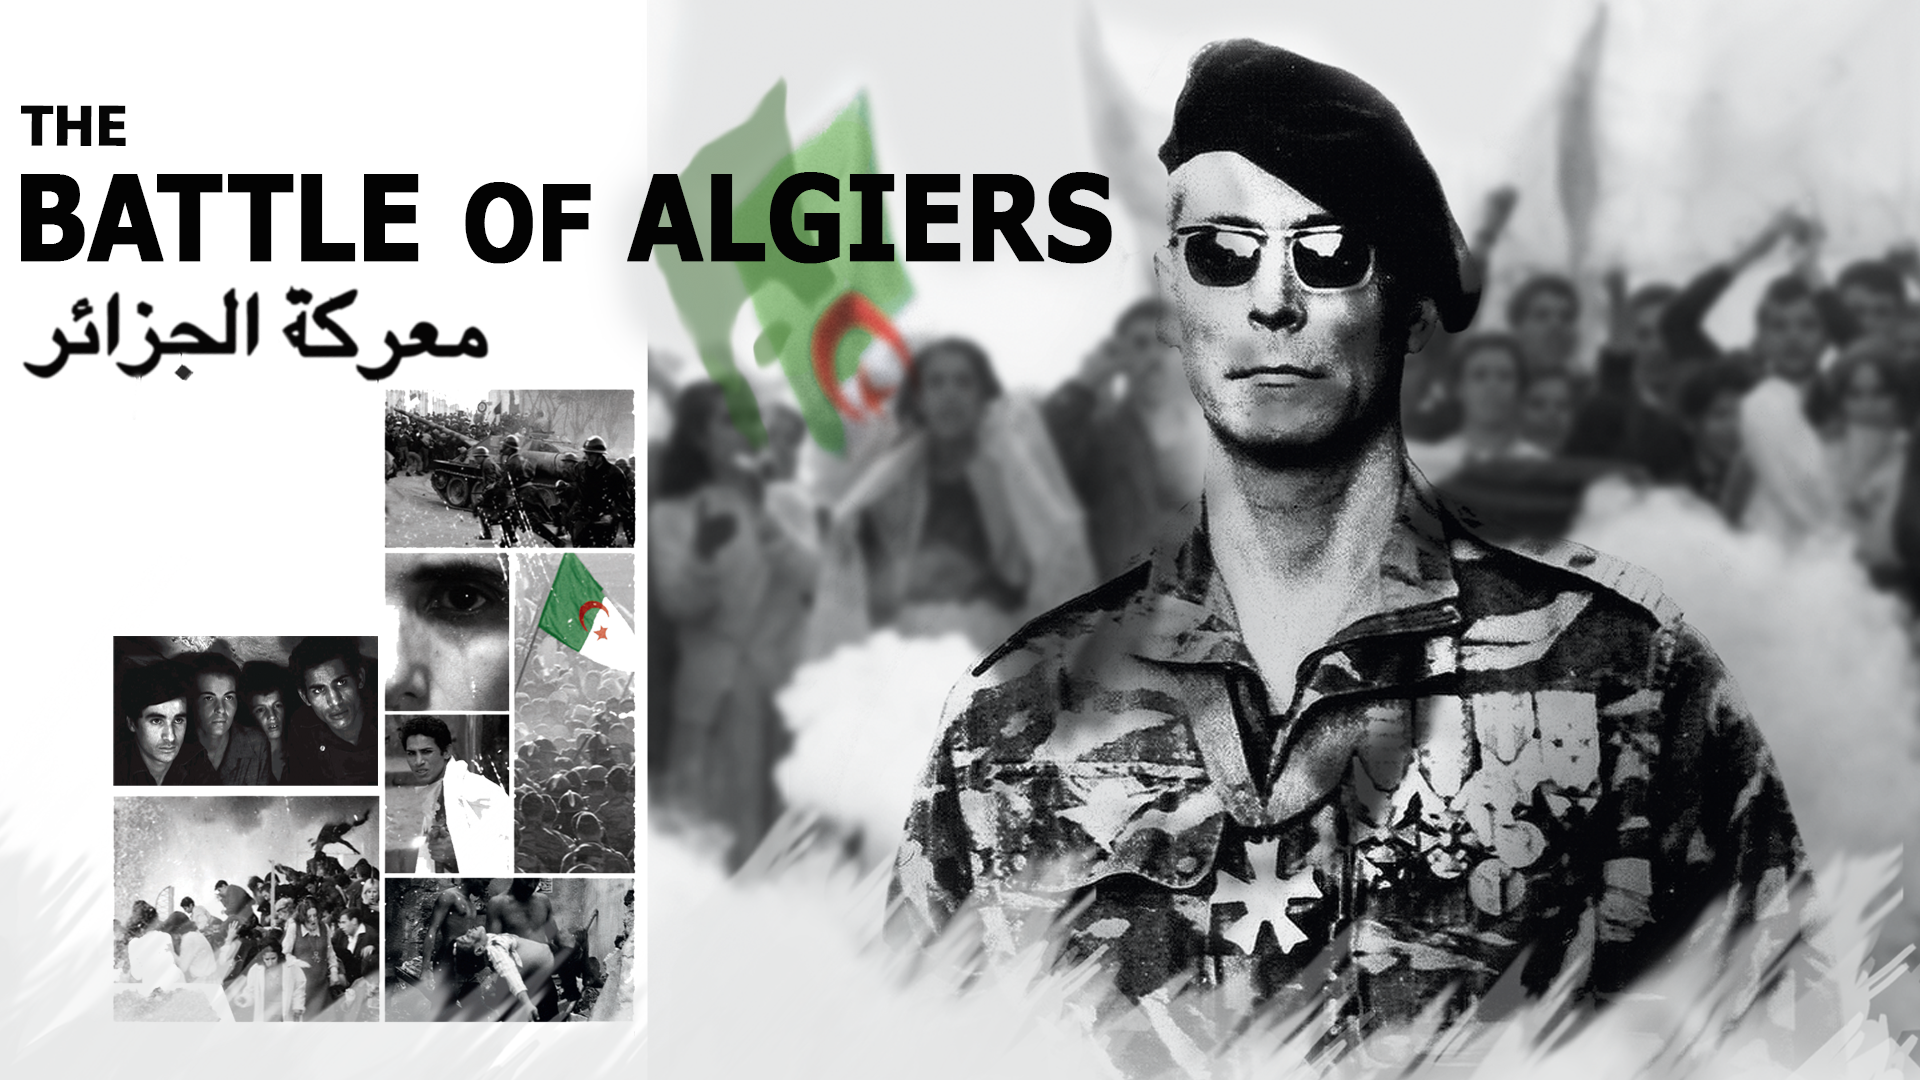 34-facts-about-the-movie-the-battle-of-algiers